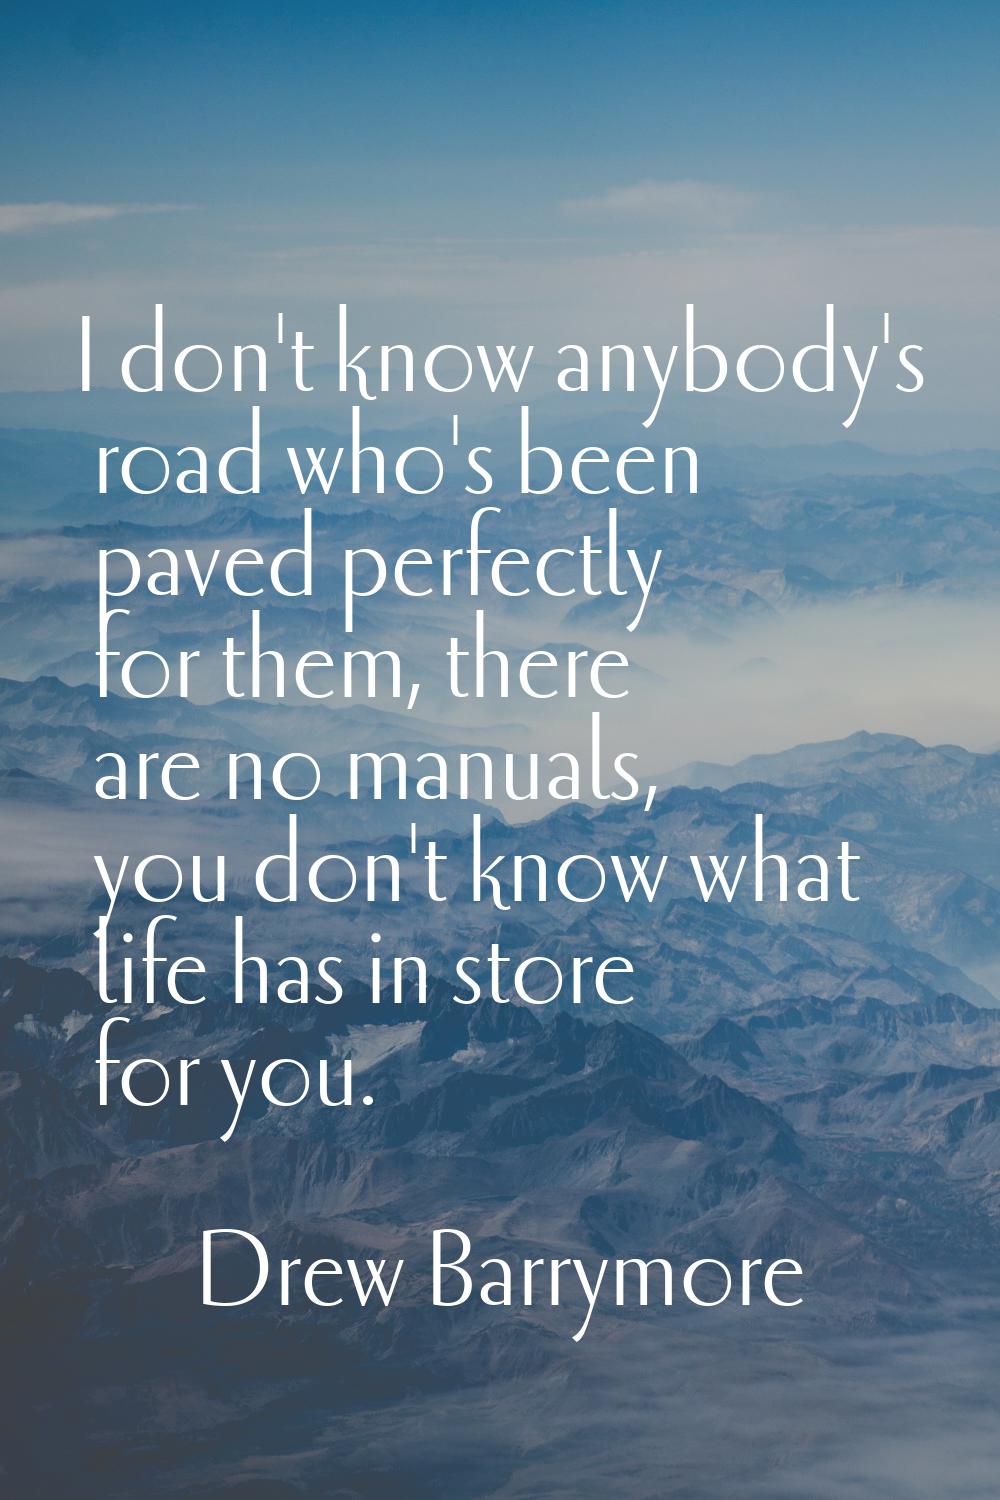 I don't know anybody's road who's been paved perfectly for them, there are no manuals, you don't kn